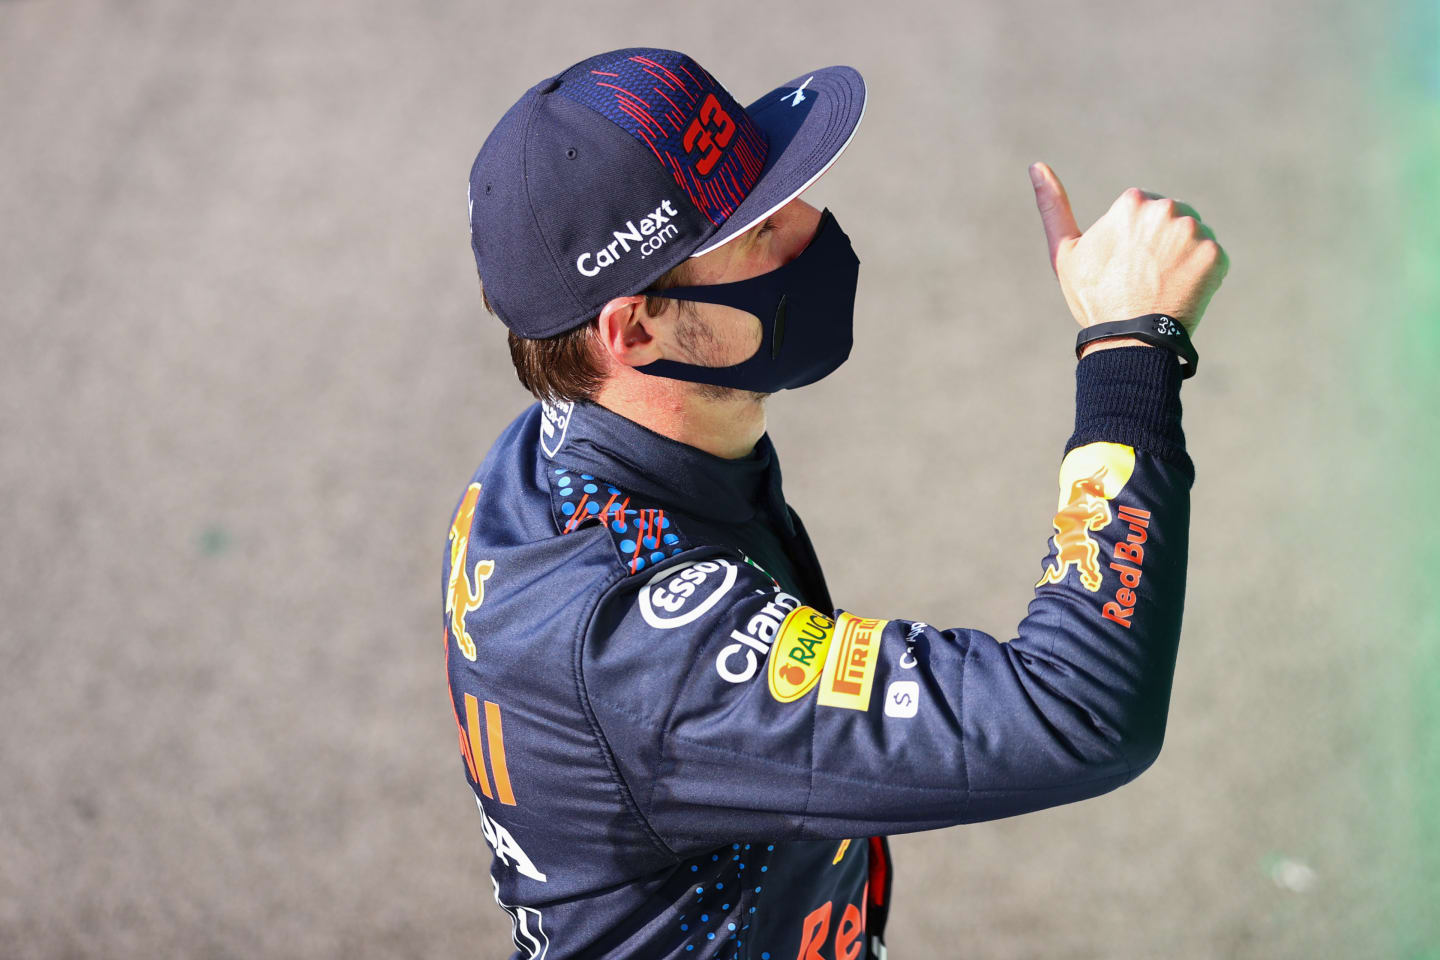 MONZA, ITALY - SEPTEMBER 11: Second place finisher Max Verstappen of Netherlands and Red Bull Racing celebrates in parc ferme during the Sprint ahead of the F1 Grand Prix of Italy at Autodromo di Monza on September 11, 2021 in Monza, Italy. (Photo by Bryn Lennon/Getty Images)